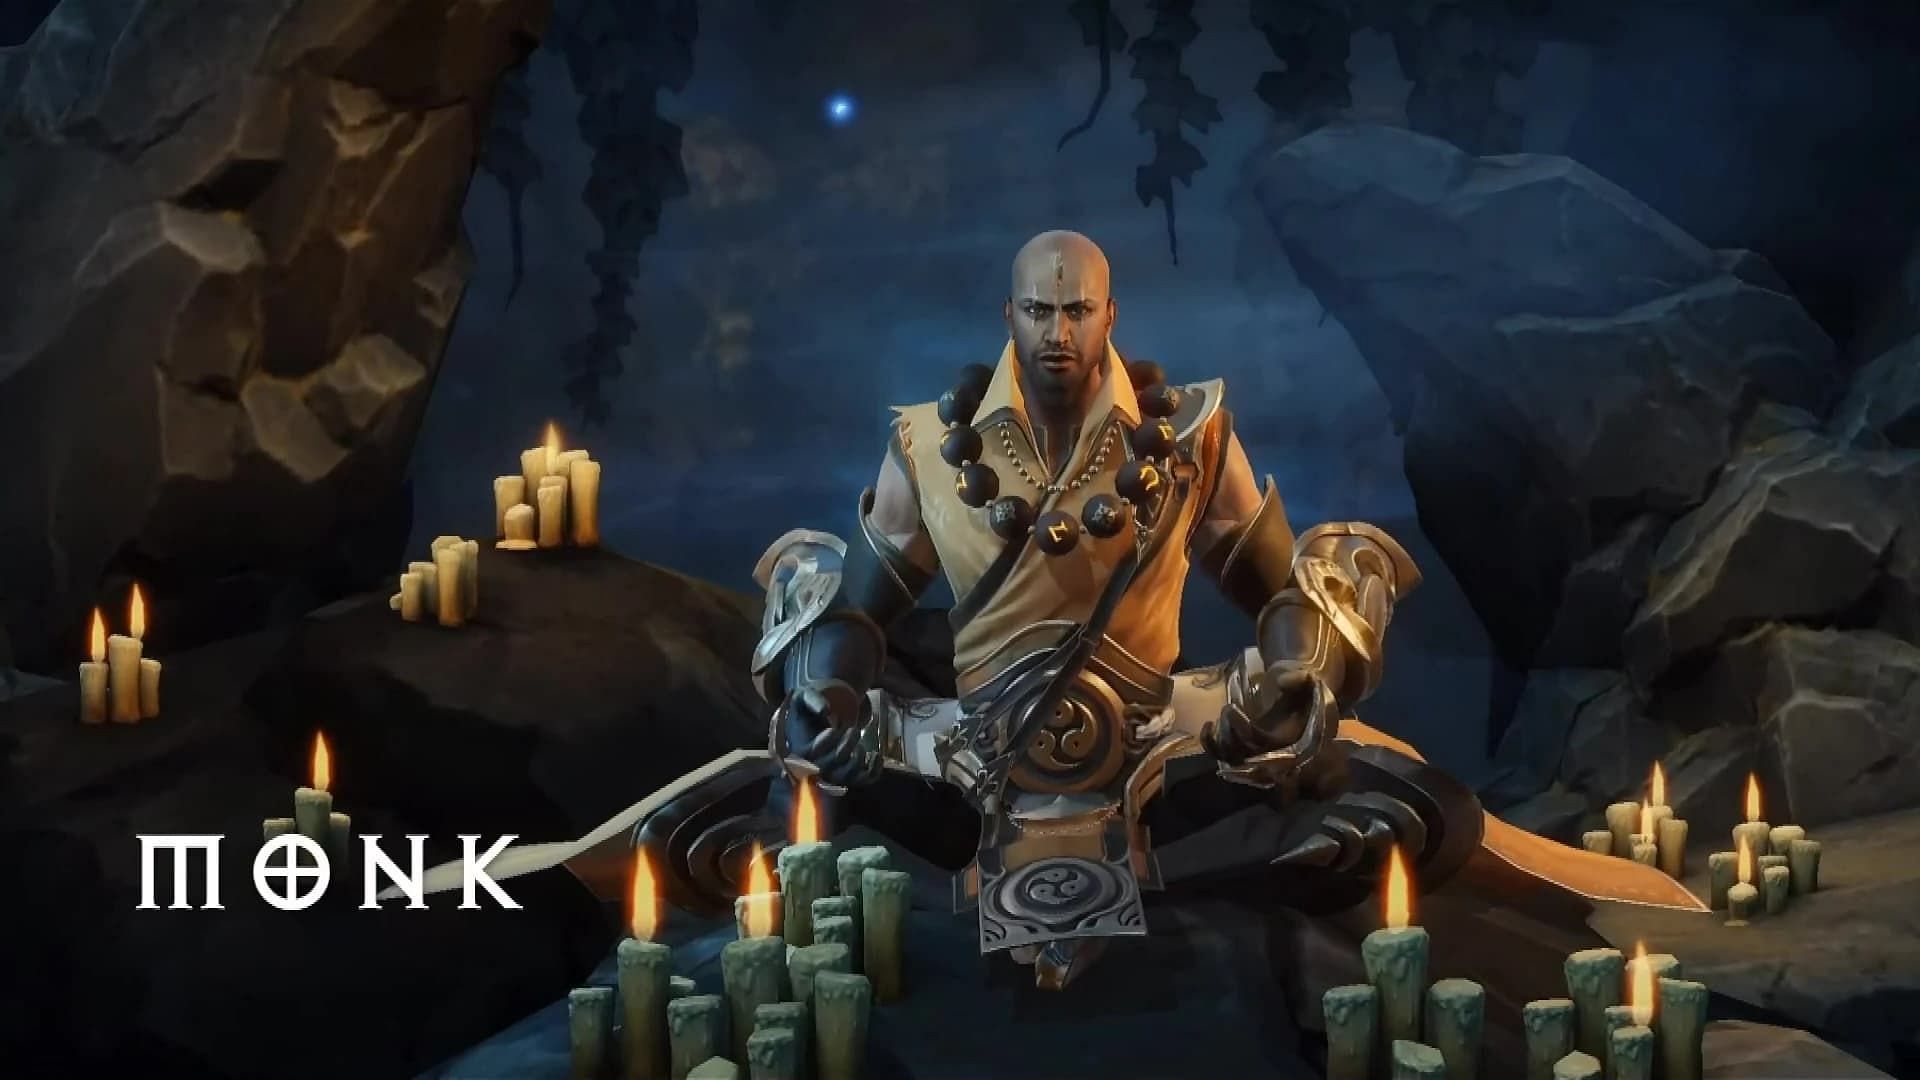 A look at a Monk character (Image via Blizzard Entertainment)